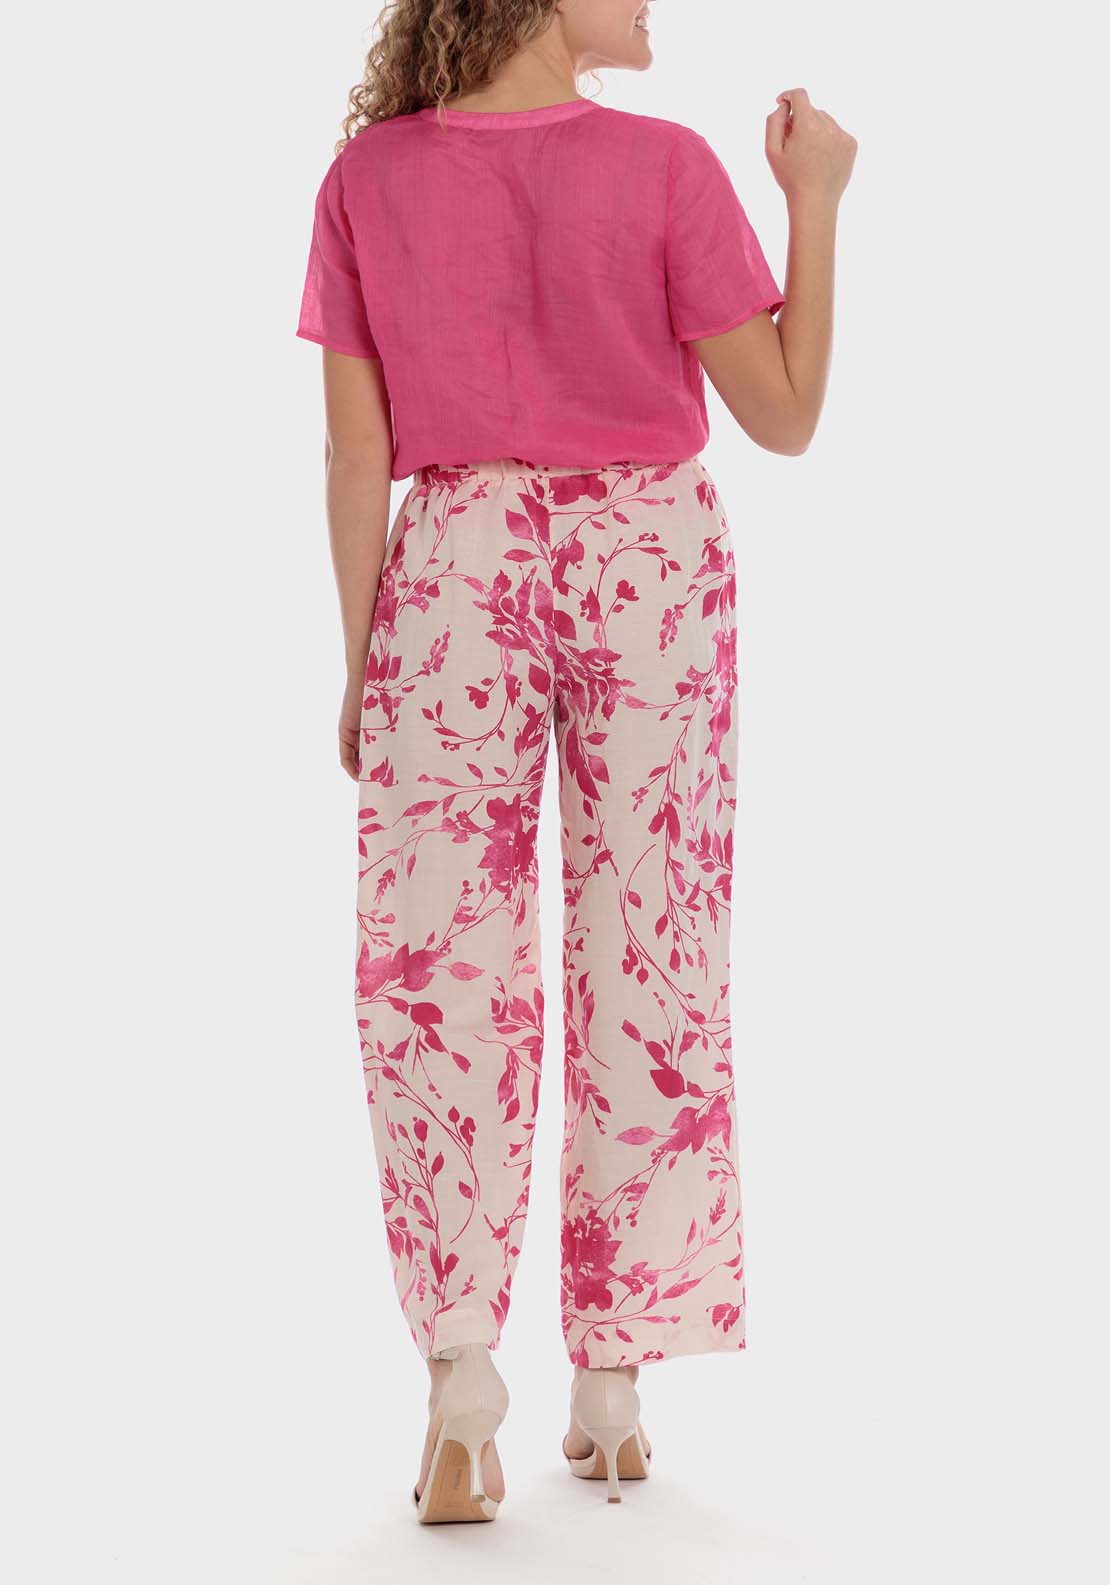 Punt Roma Printed Linen Trouser - Pink 5 Shaws Department Stores